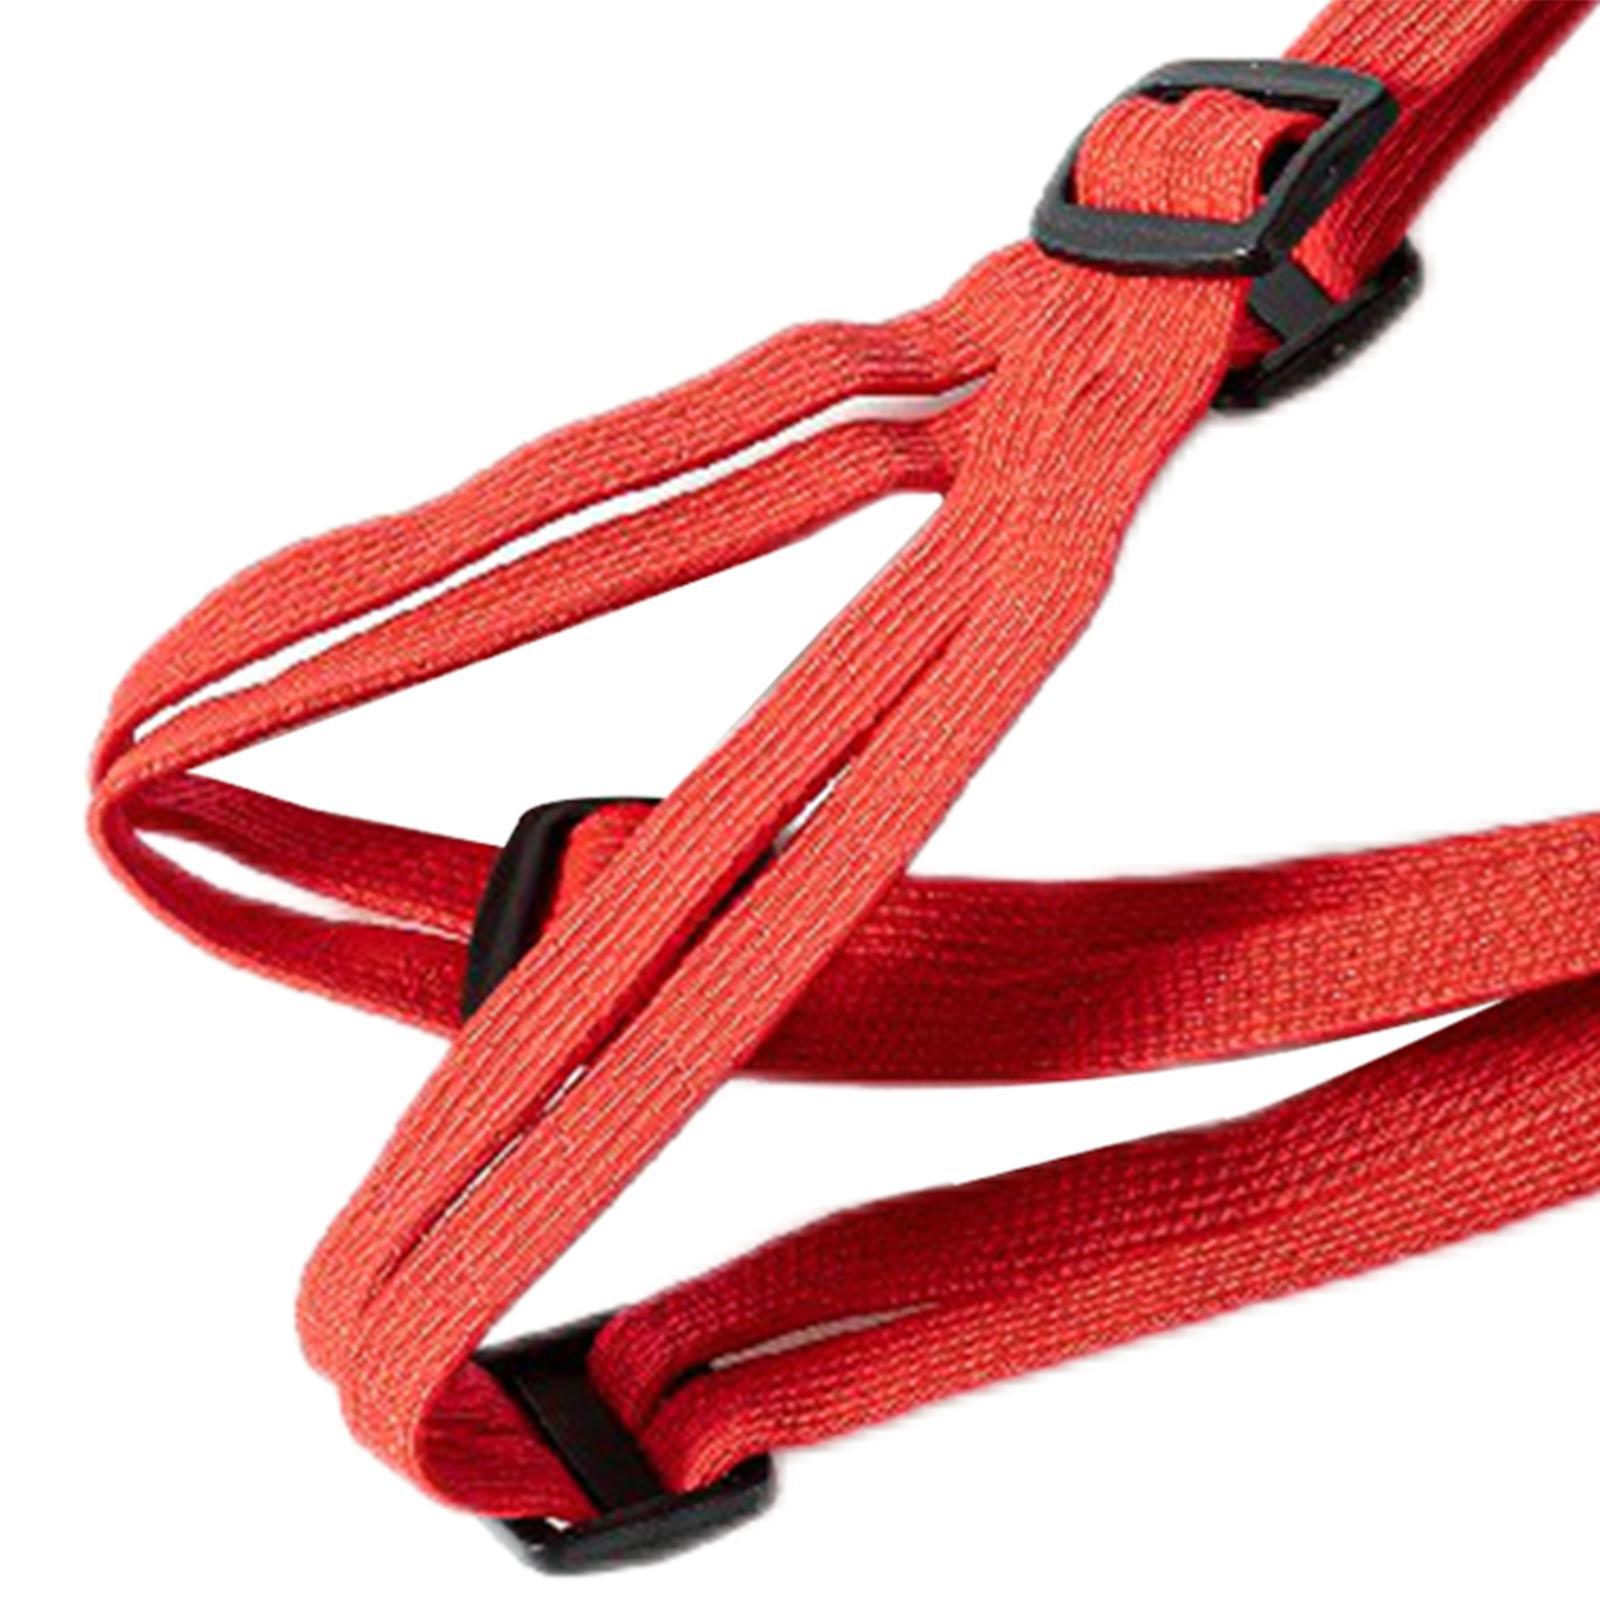 Motorcycle Luggage  Strap Luggage Band Moto for Accessories Red